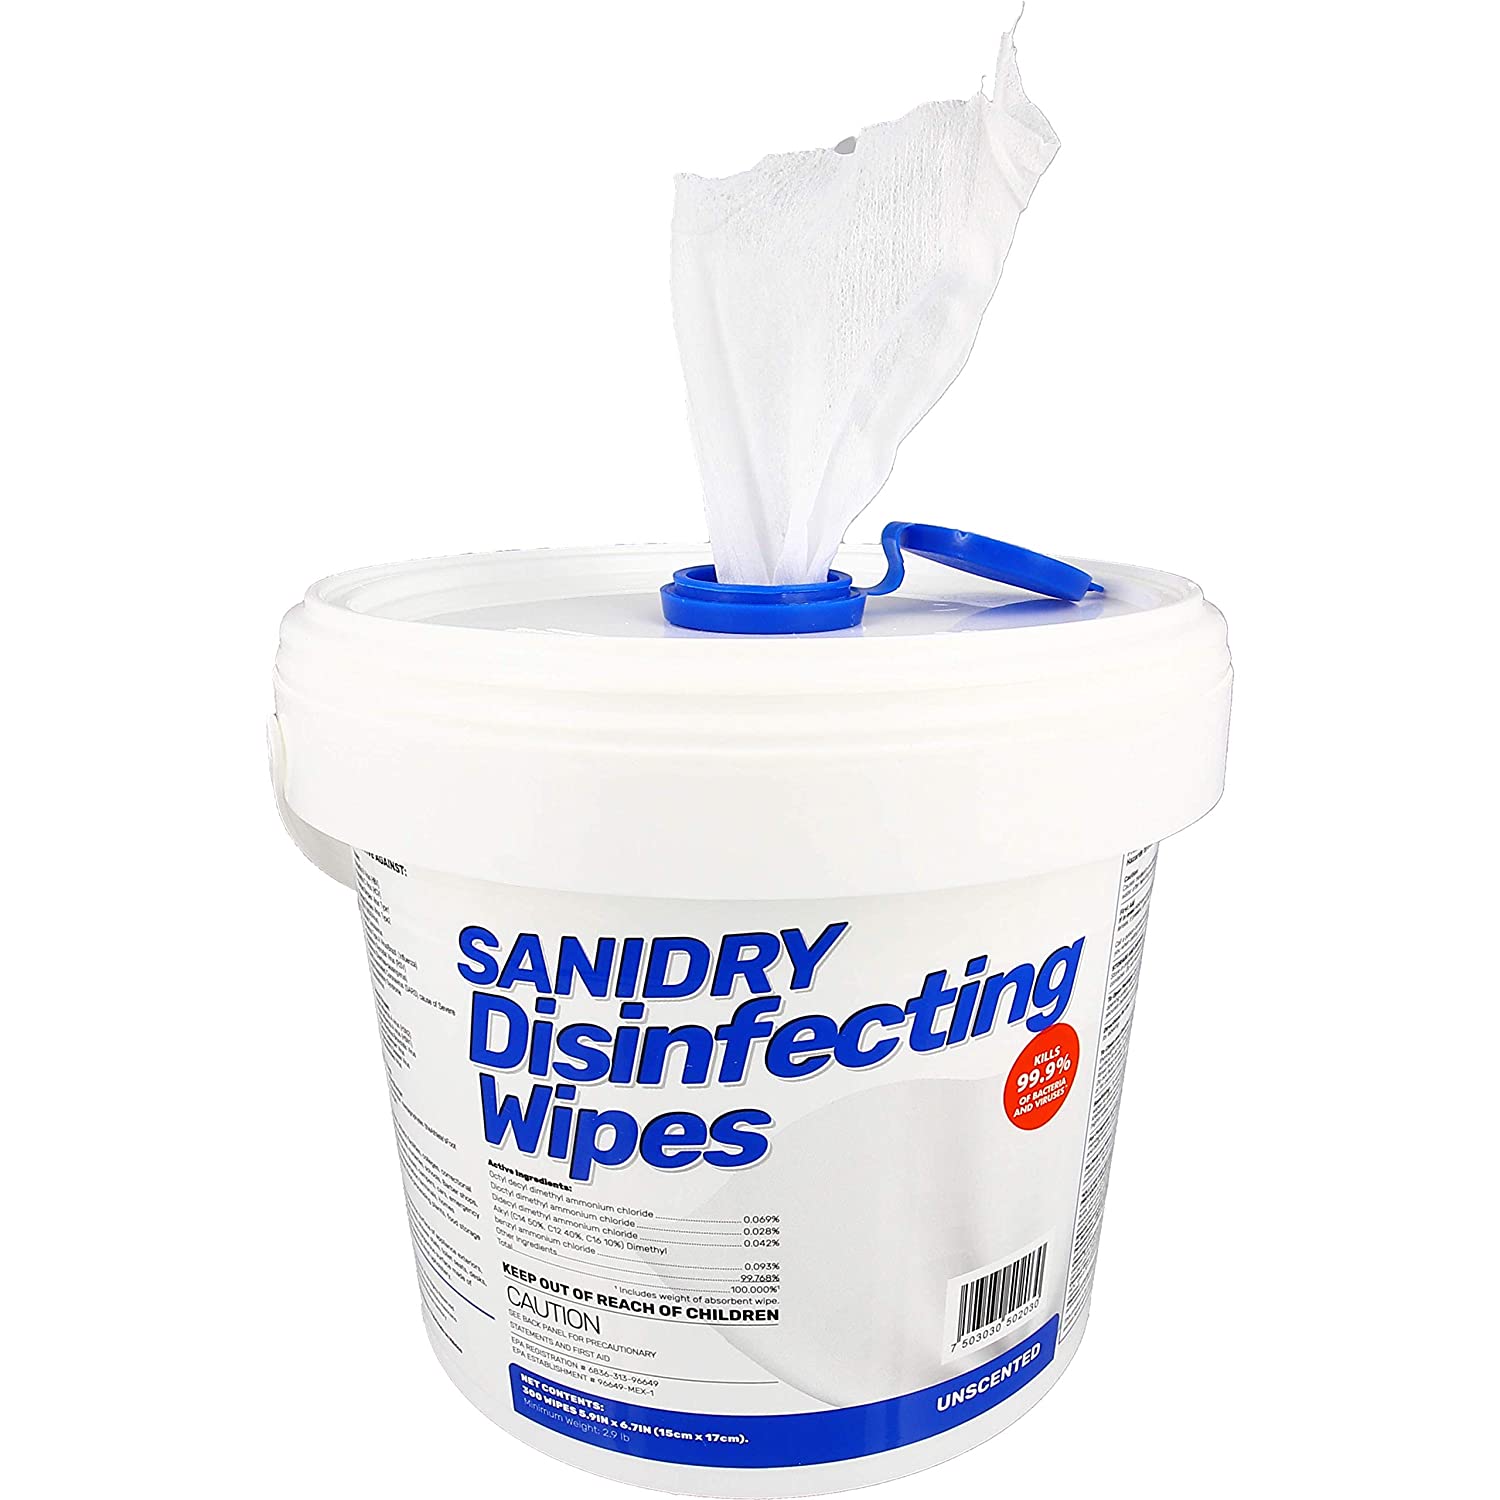 Sanidry Disinfectant Wipes - Container